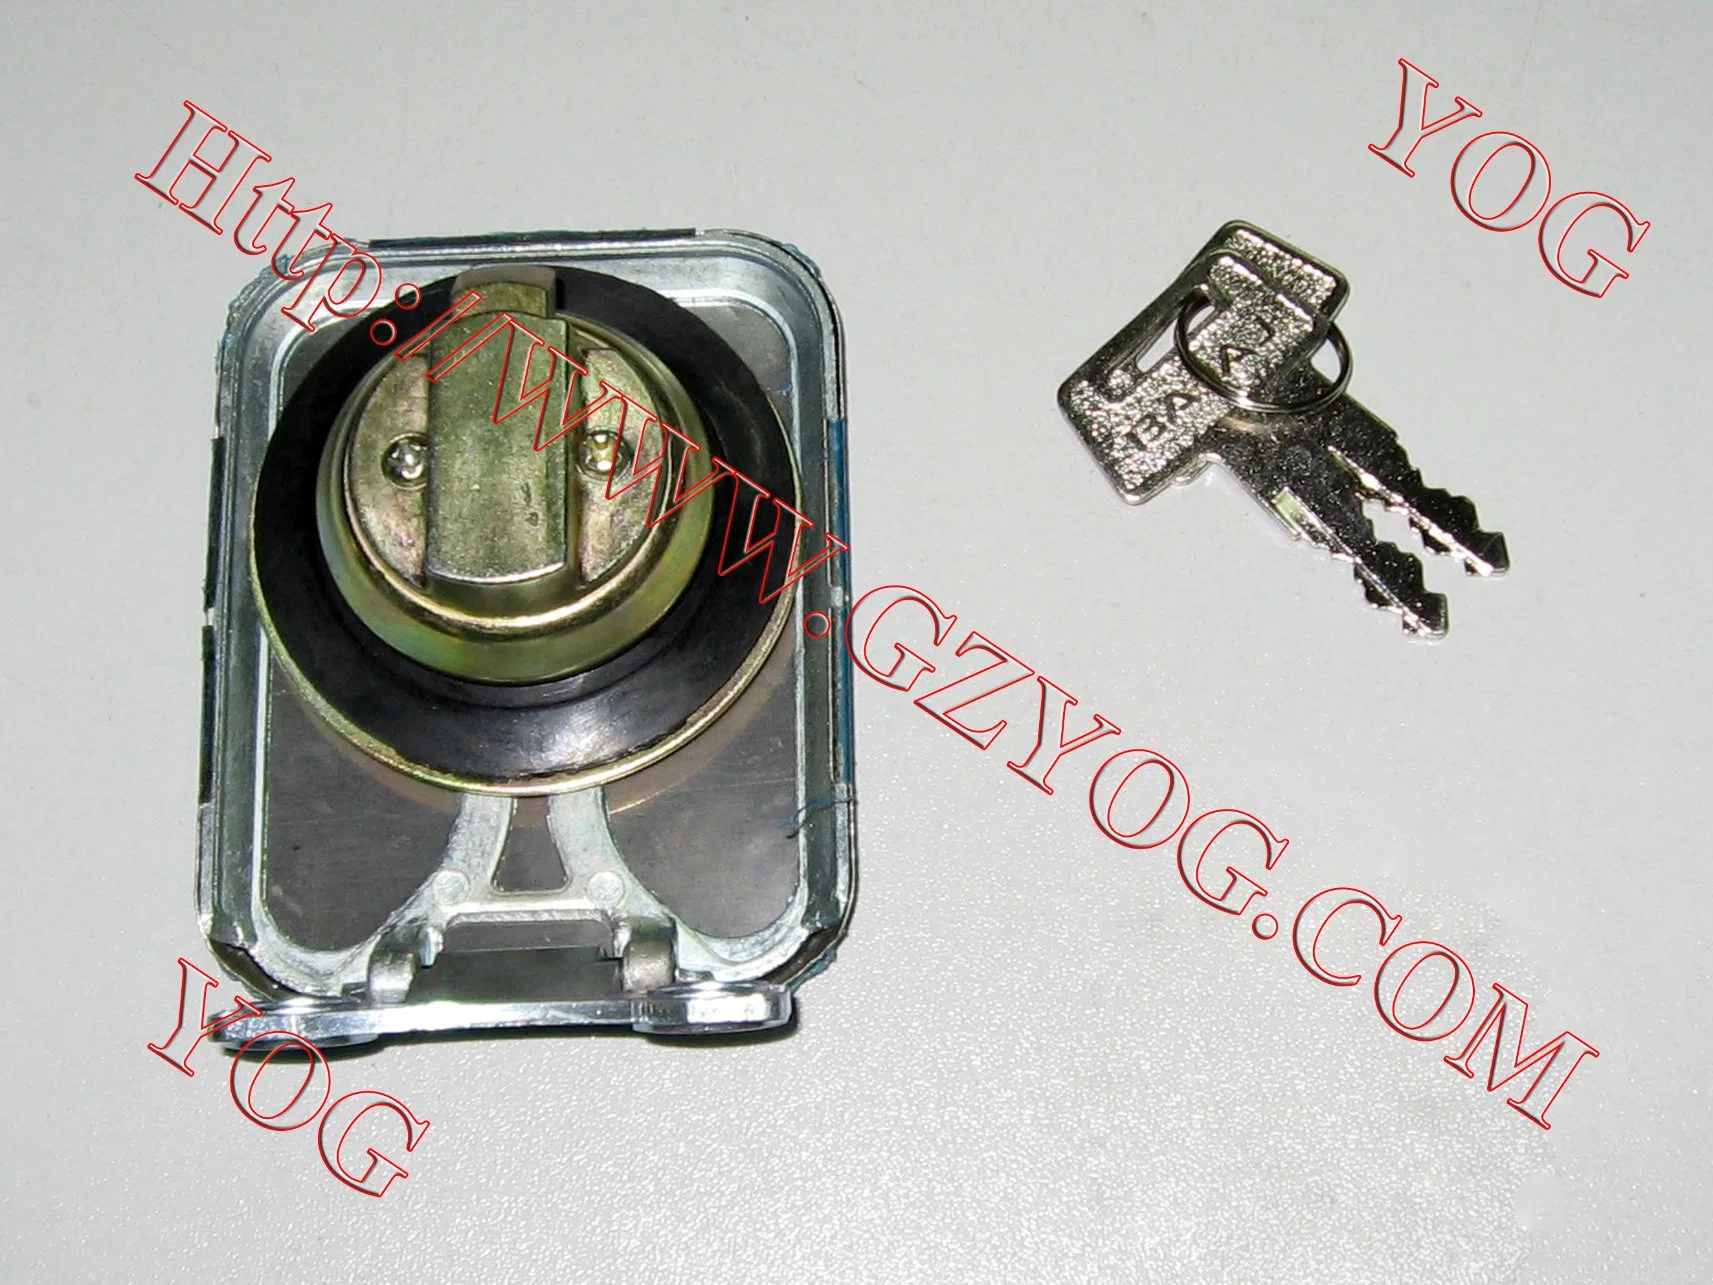 Motorcycle Spare Parts Motorcycle Tank Lock Ignition Switch Ax100 Bajaj Boxer Bm150